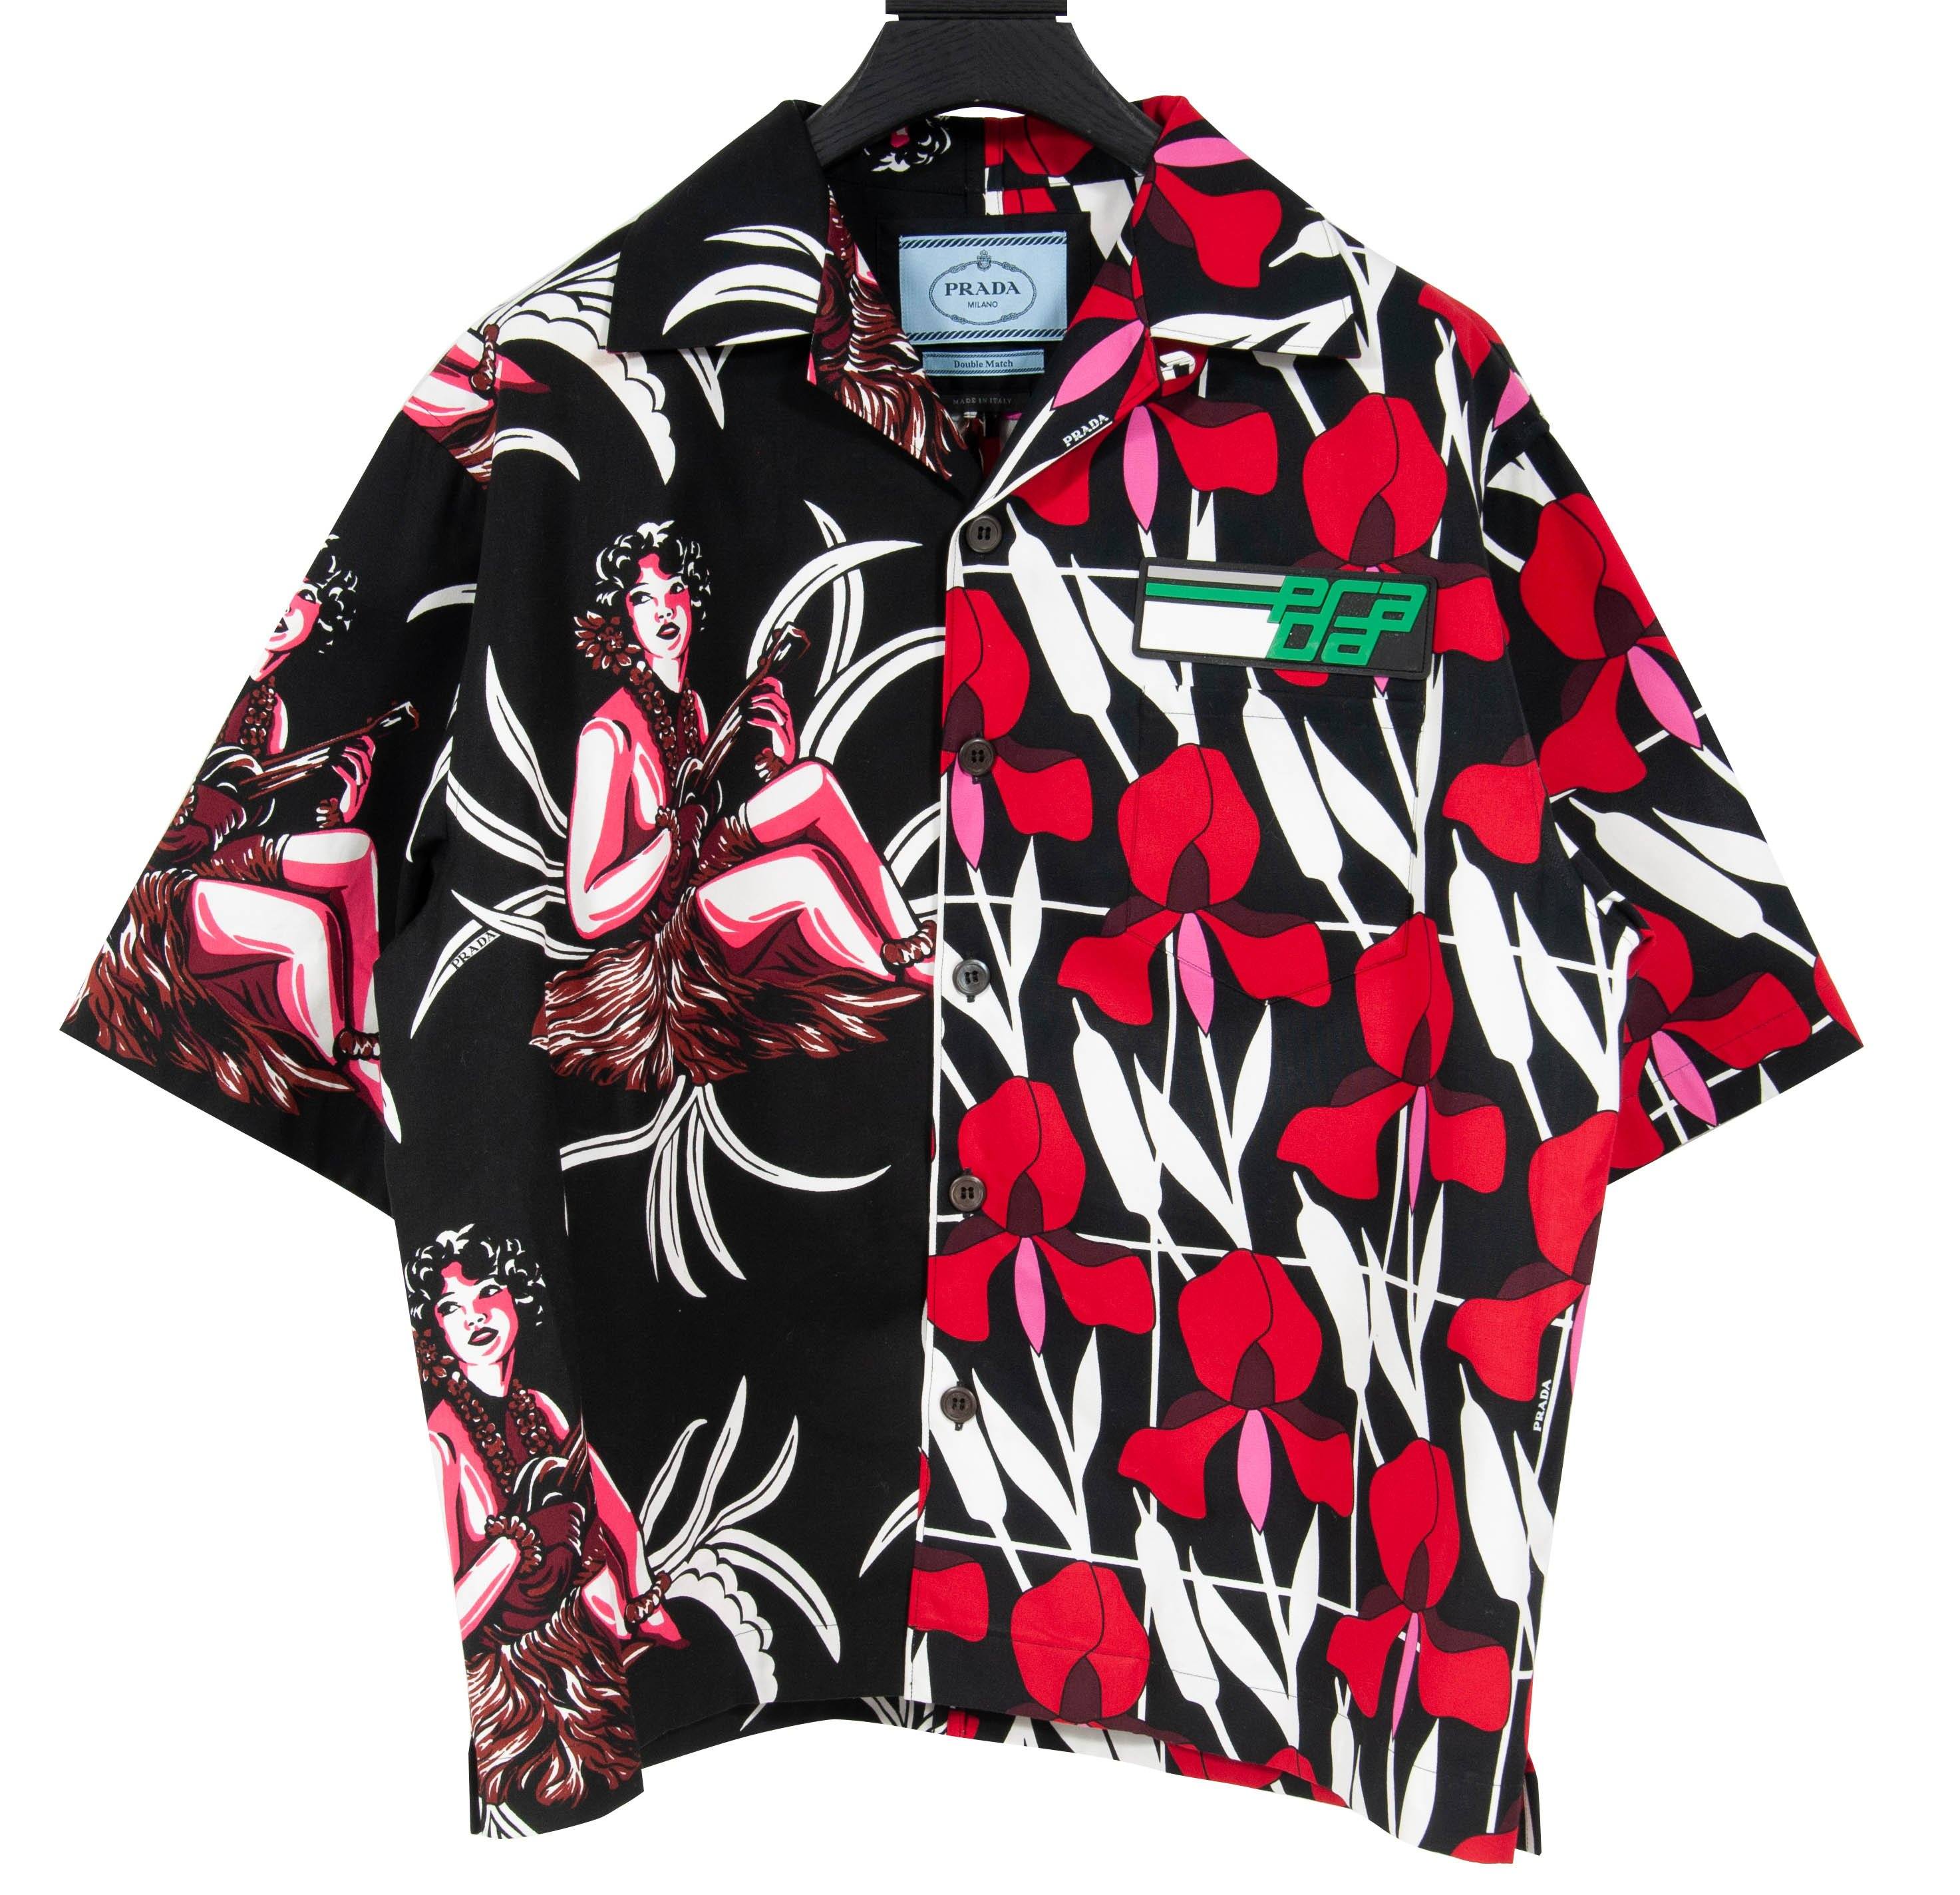 Prada Delivers Four New Graphic-Clad Bowling Shirts for SS20